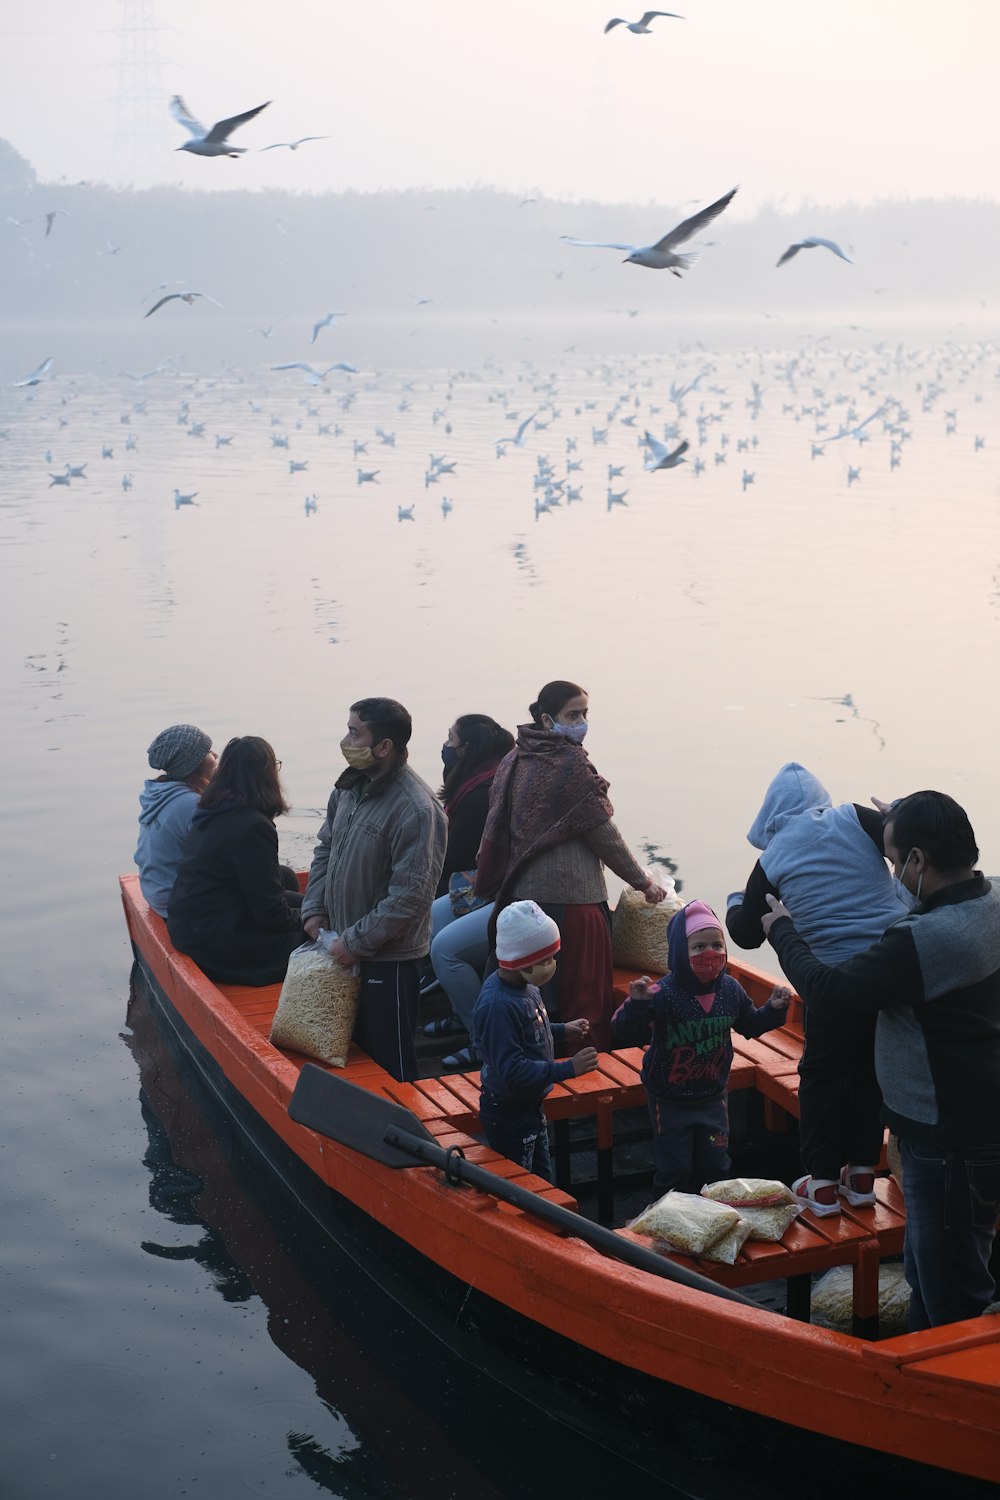 a group of people in a boat on the water